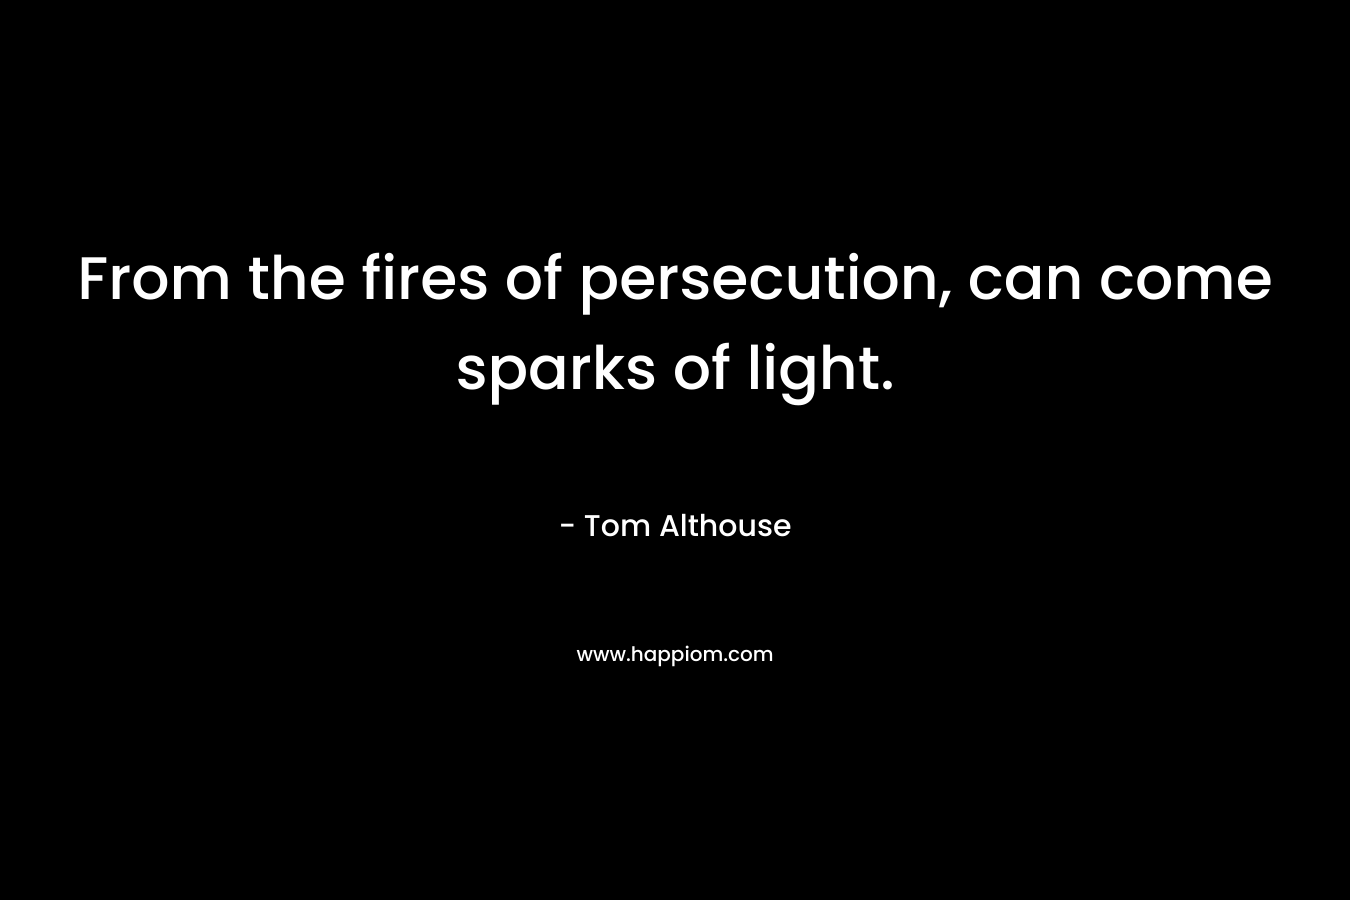 From the fires of persecution, can come sparks of light. – Tom Althouse